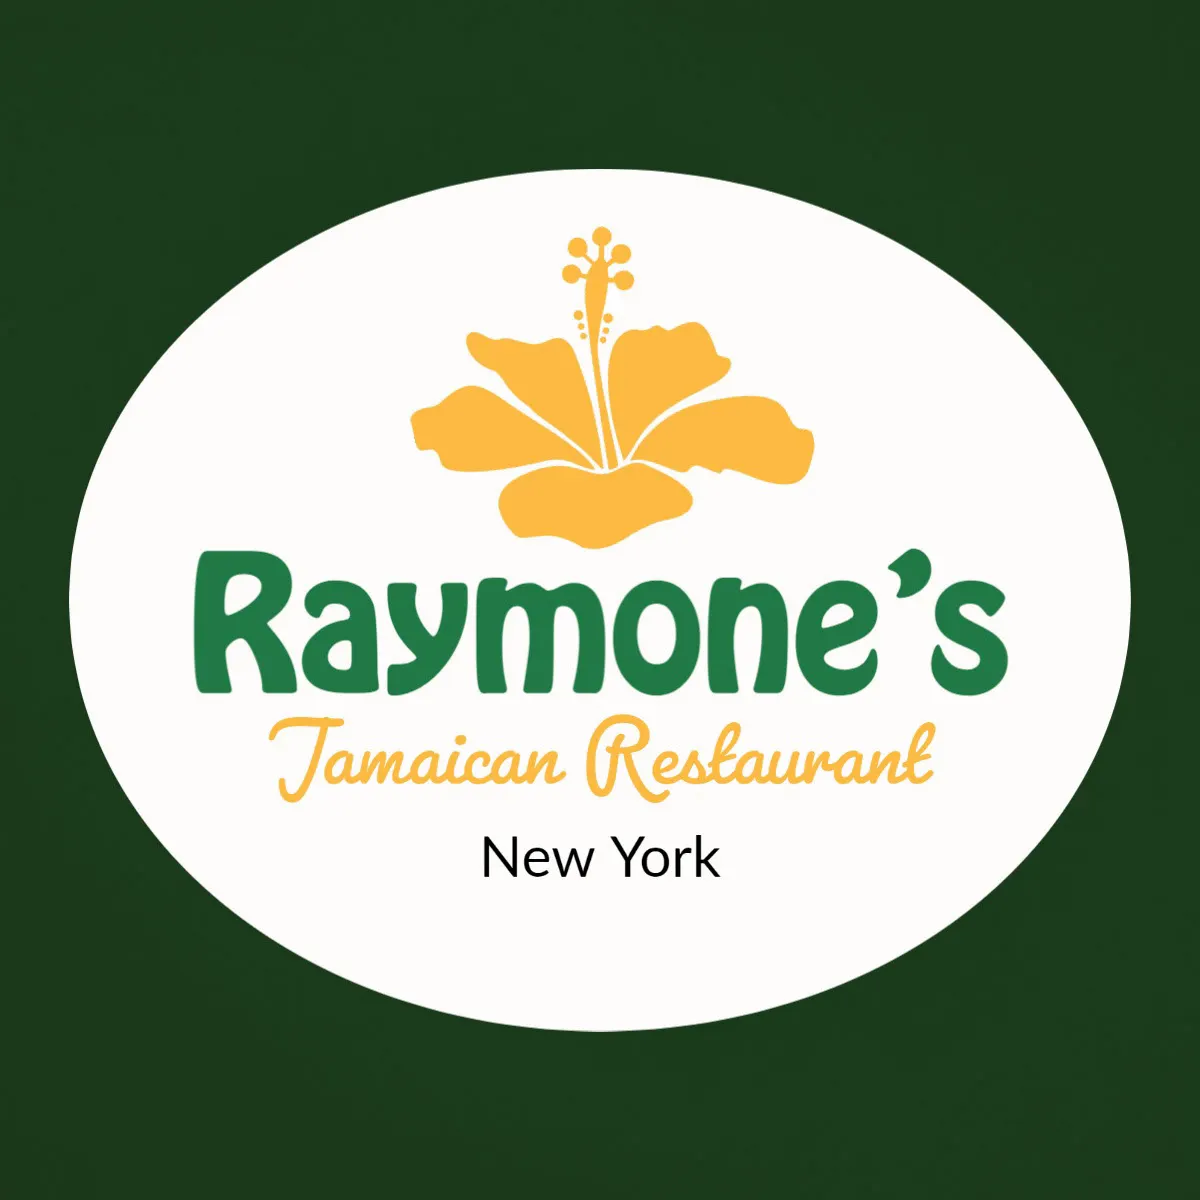 Green, Yellow, Red and Black Jamaican Restaurant Logo